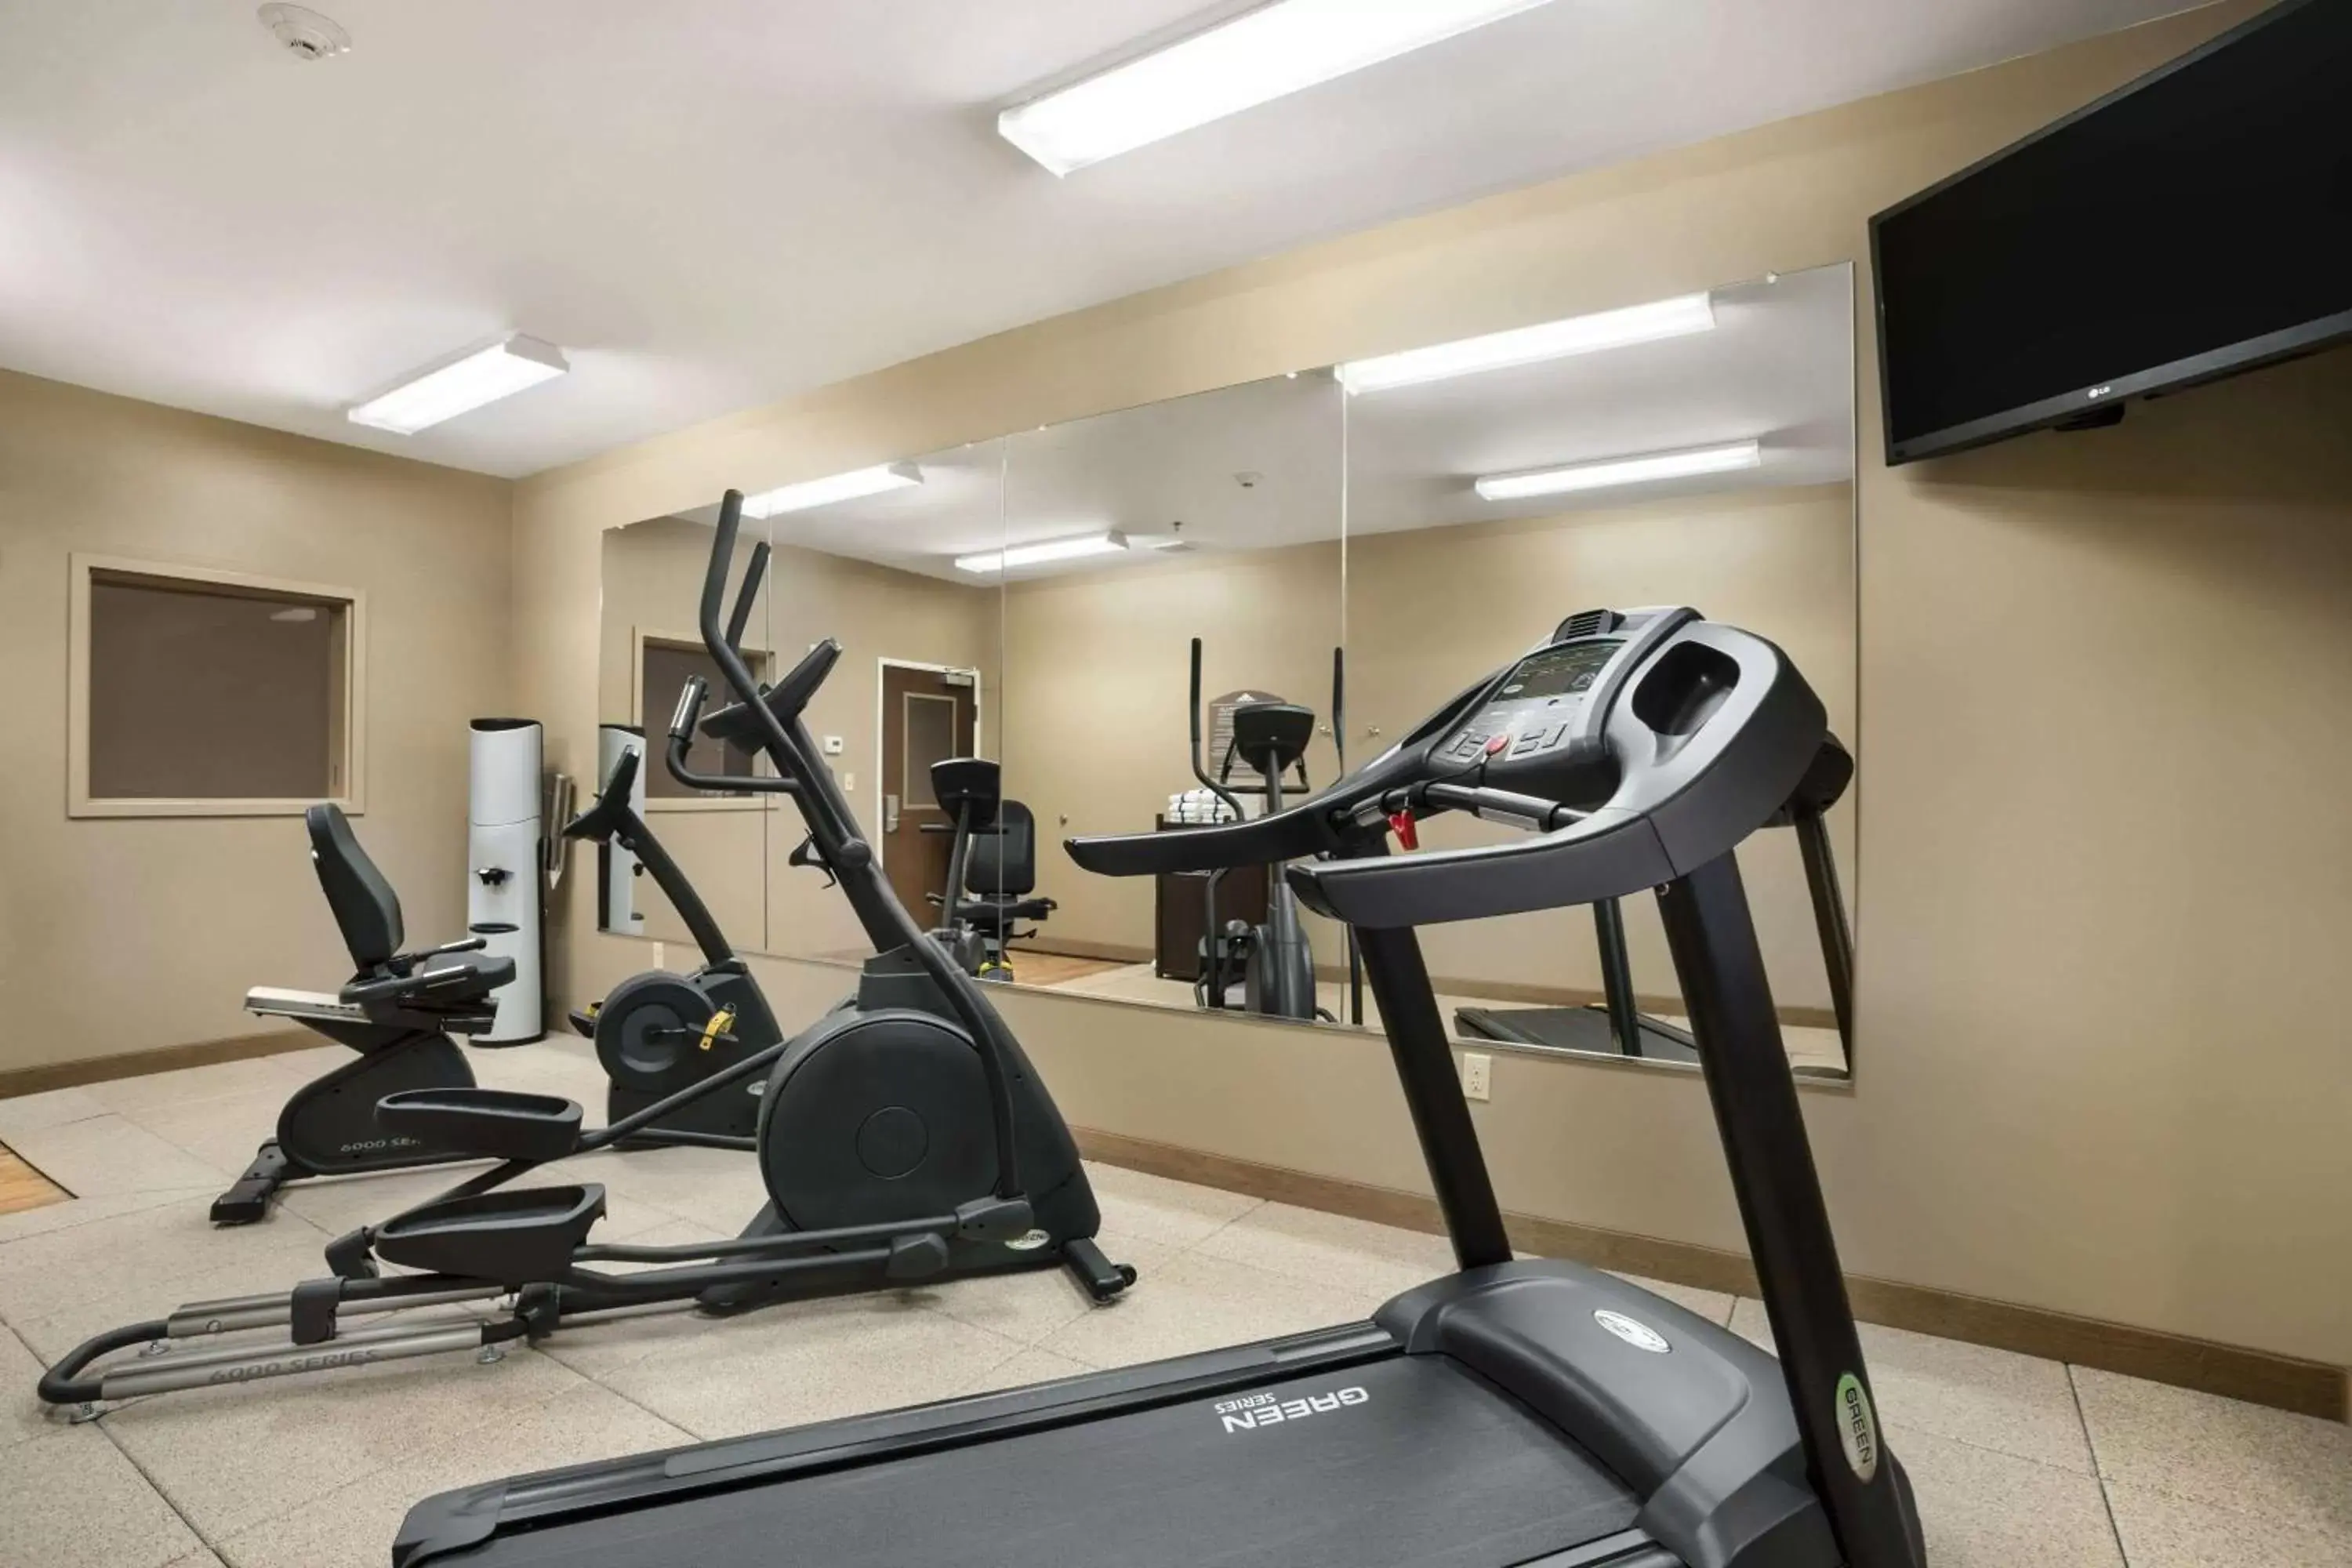 Fitness centre/facilities, Fitness Center/Facilities in Microtel Inn & Suites by Wyndham Cambridge